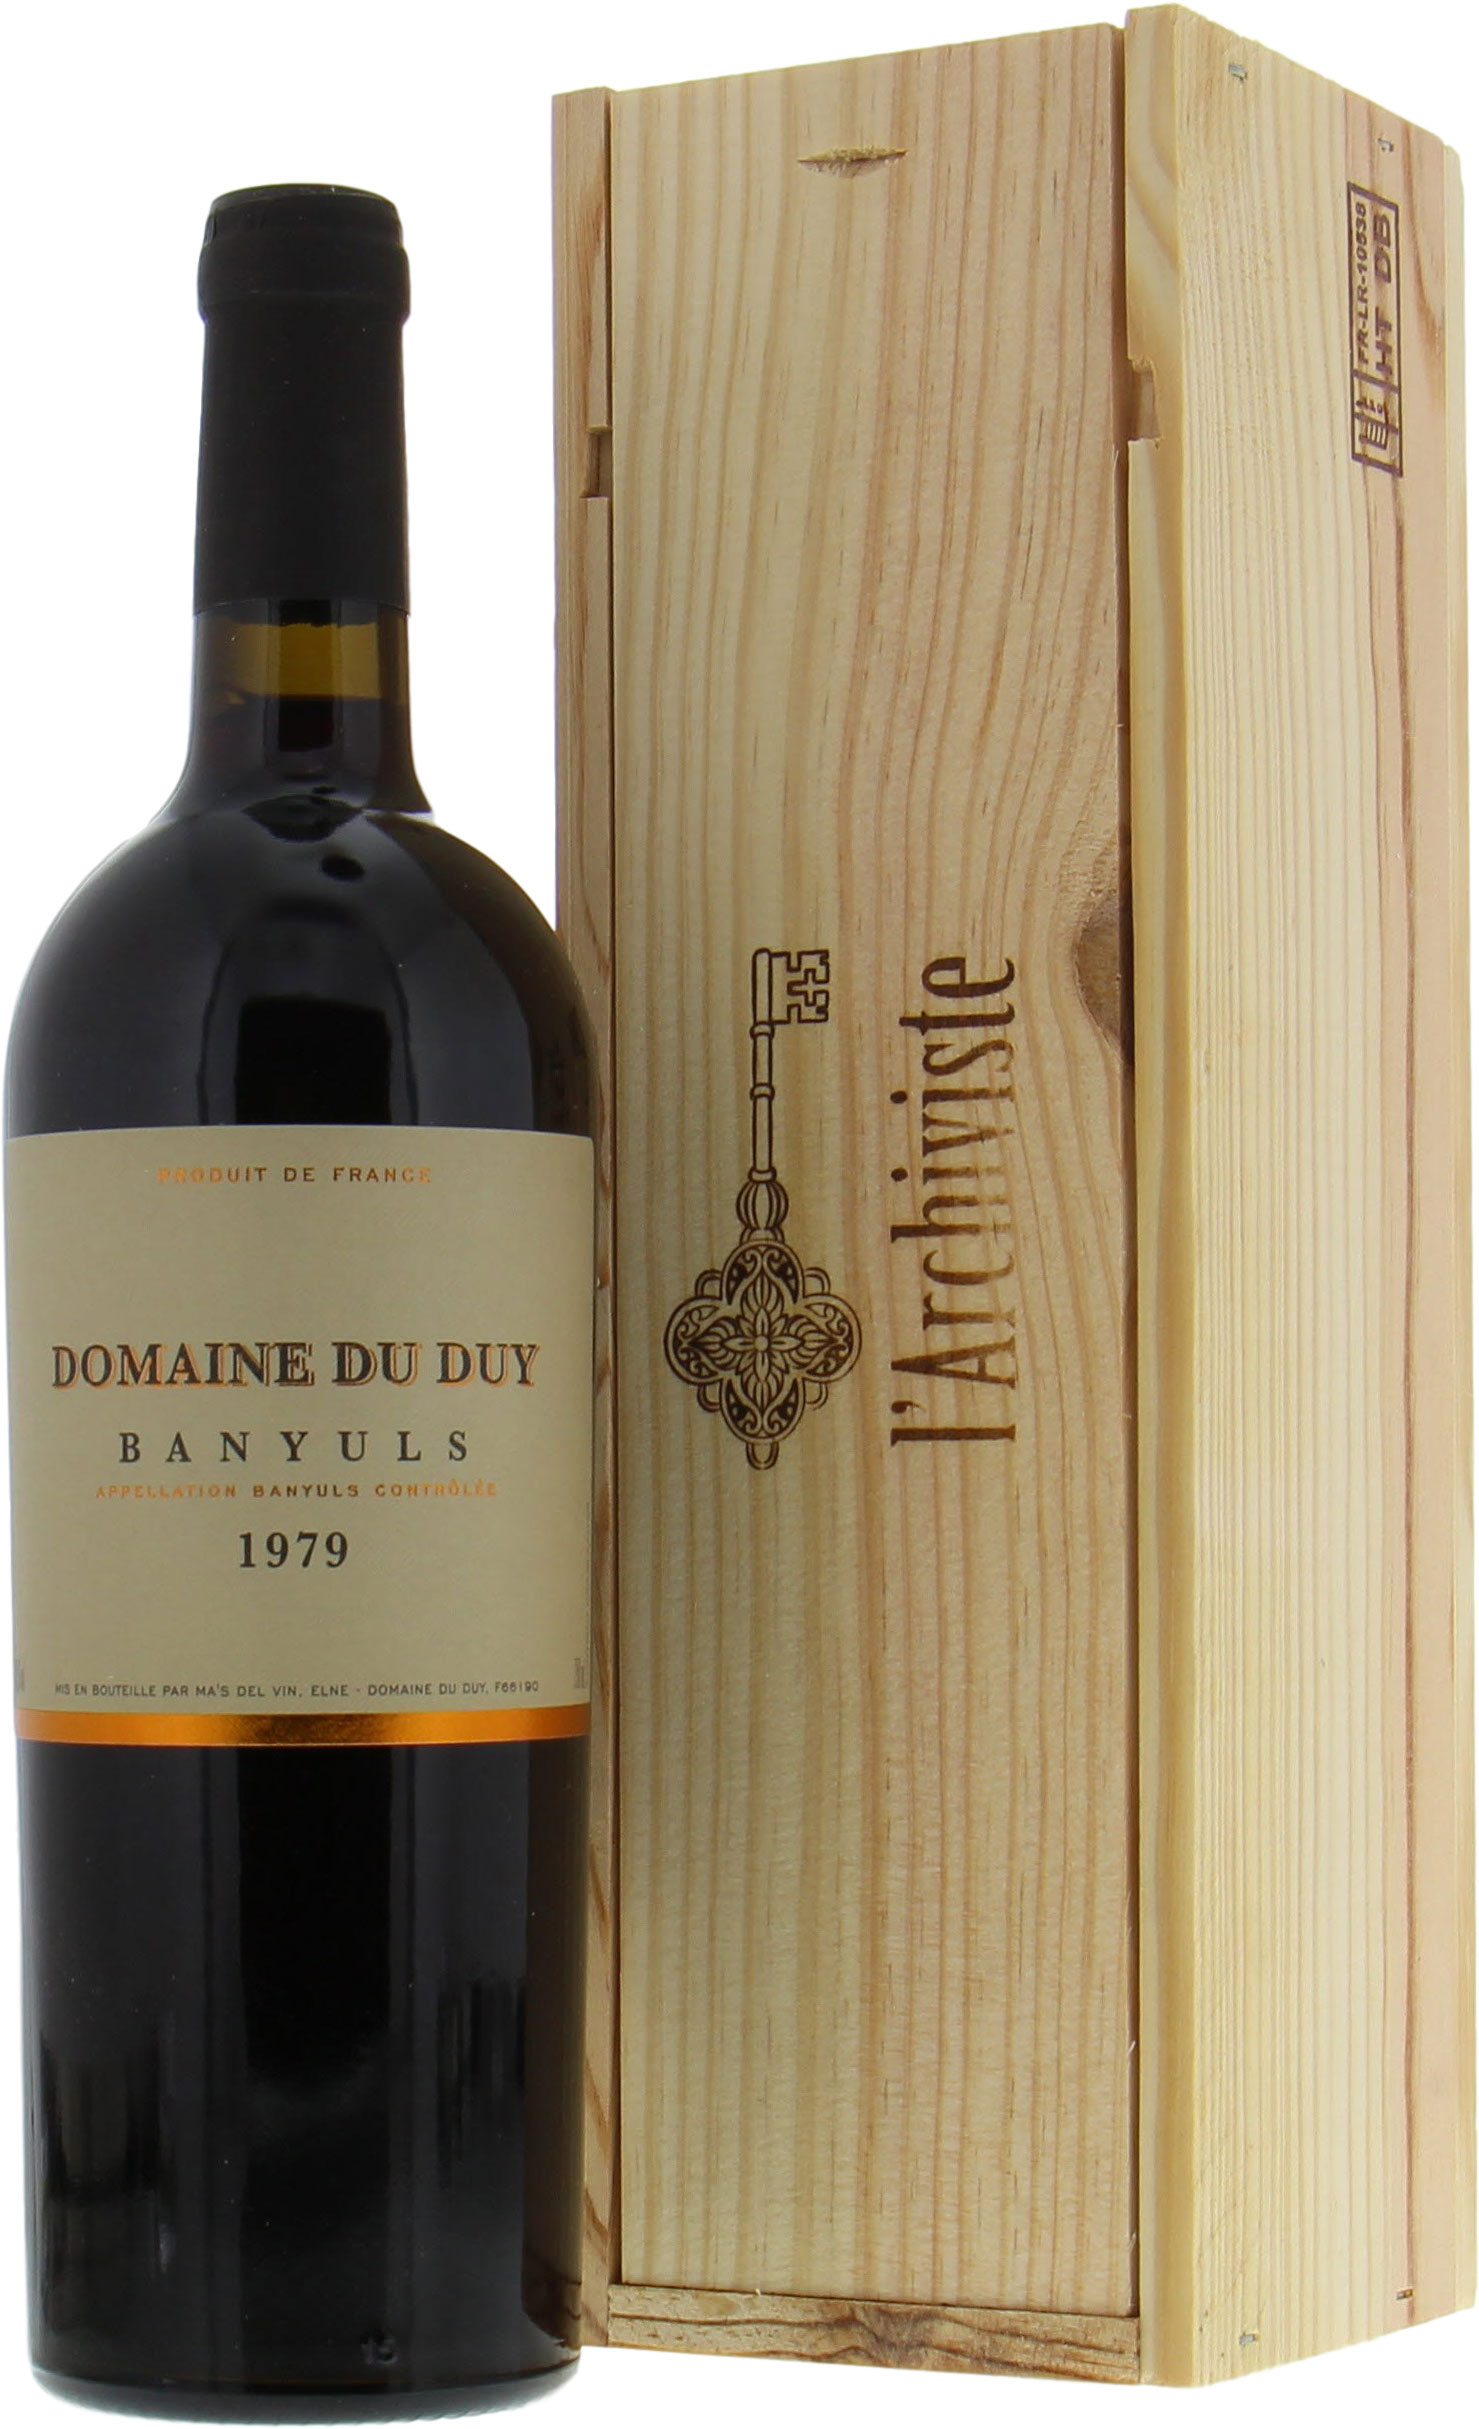 Domaine du Duy - Banyuls 1979 Perfect